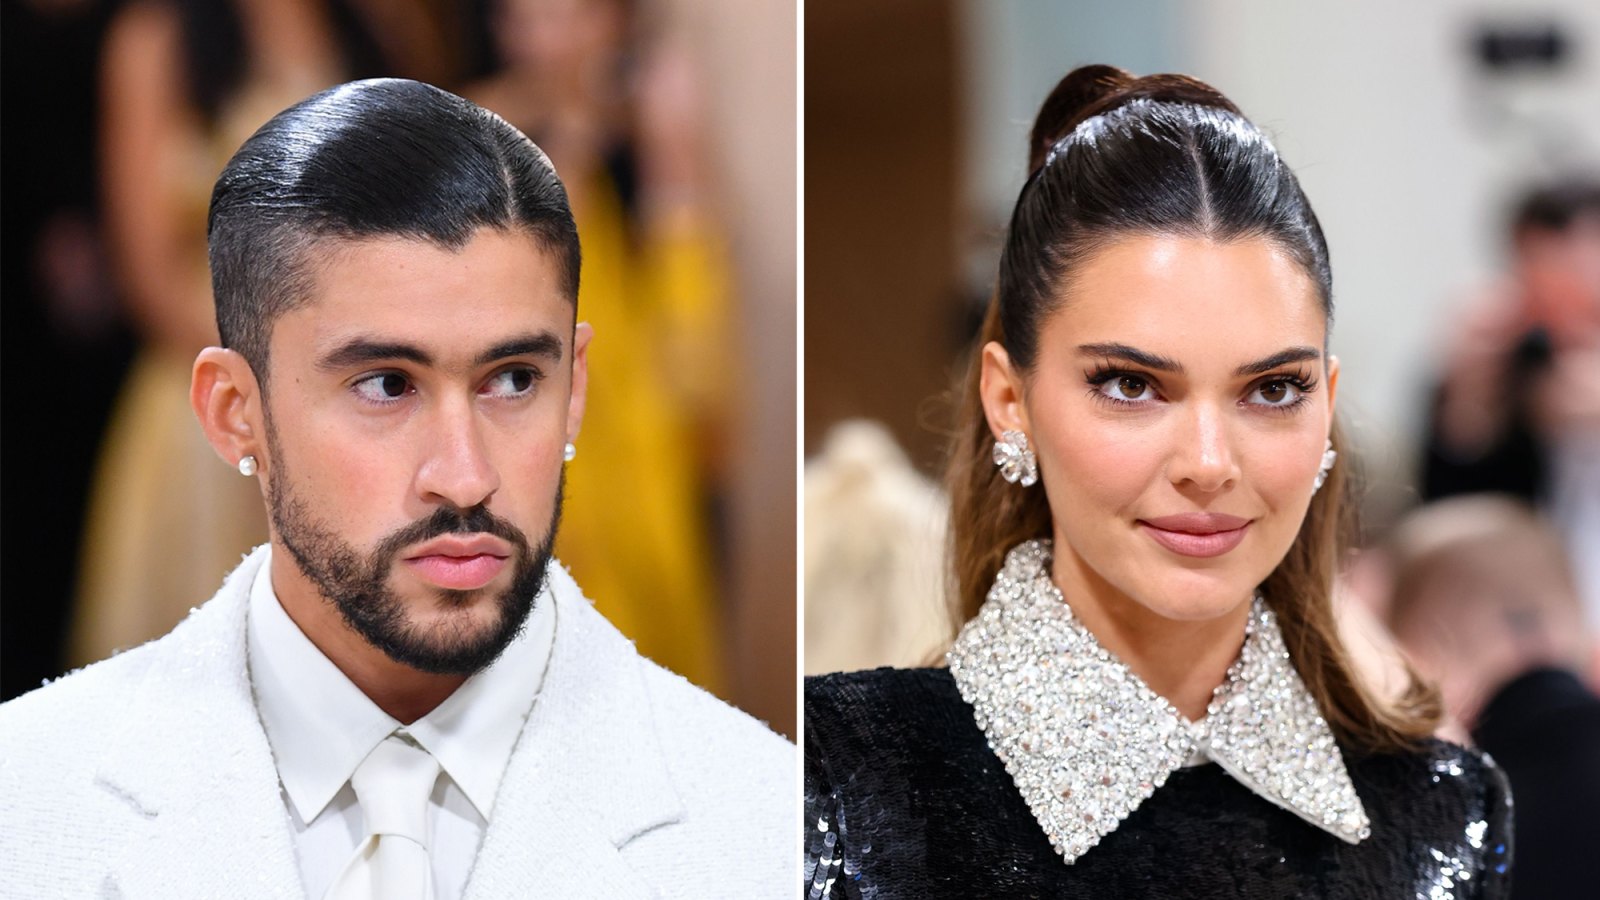 Are Kendall Jenner and Bad Bunny Dating? Here's What We Know